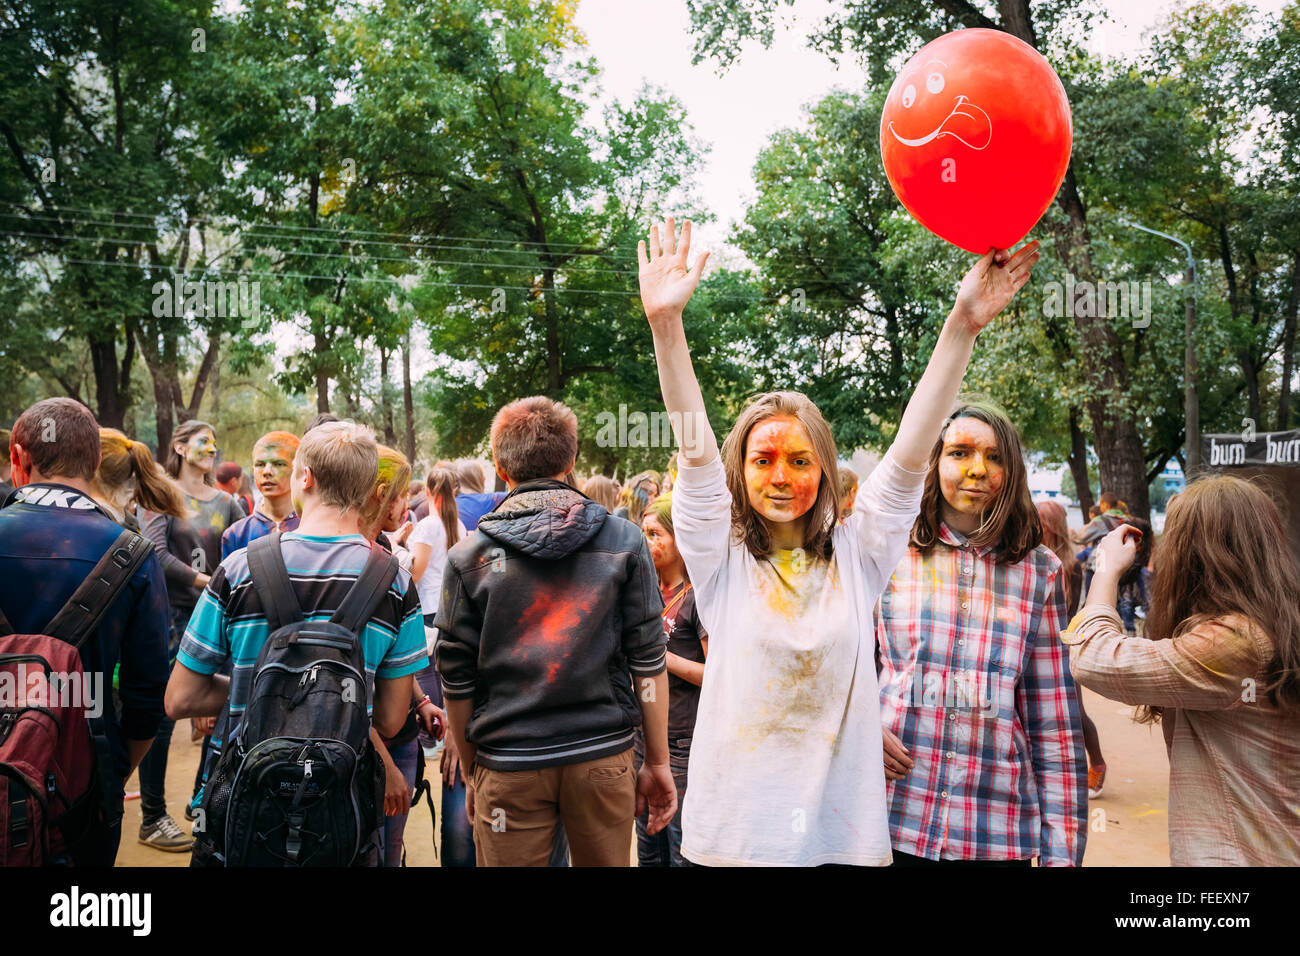 Gomel, Belarus - September 12, 2015: Young people having fun and dancing together at Holi color festival in park Stock Photo